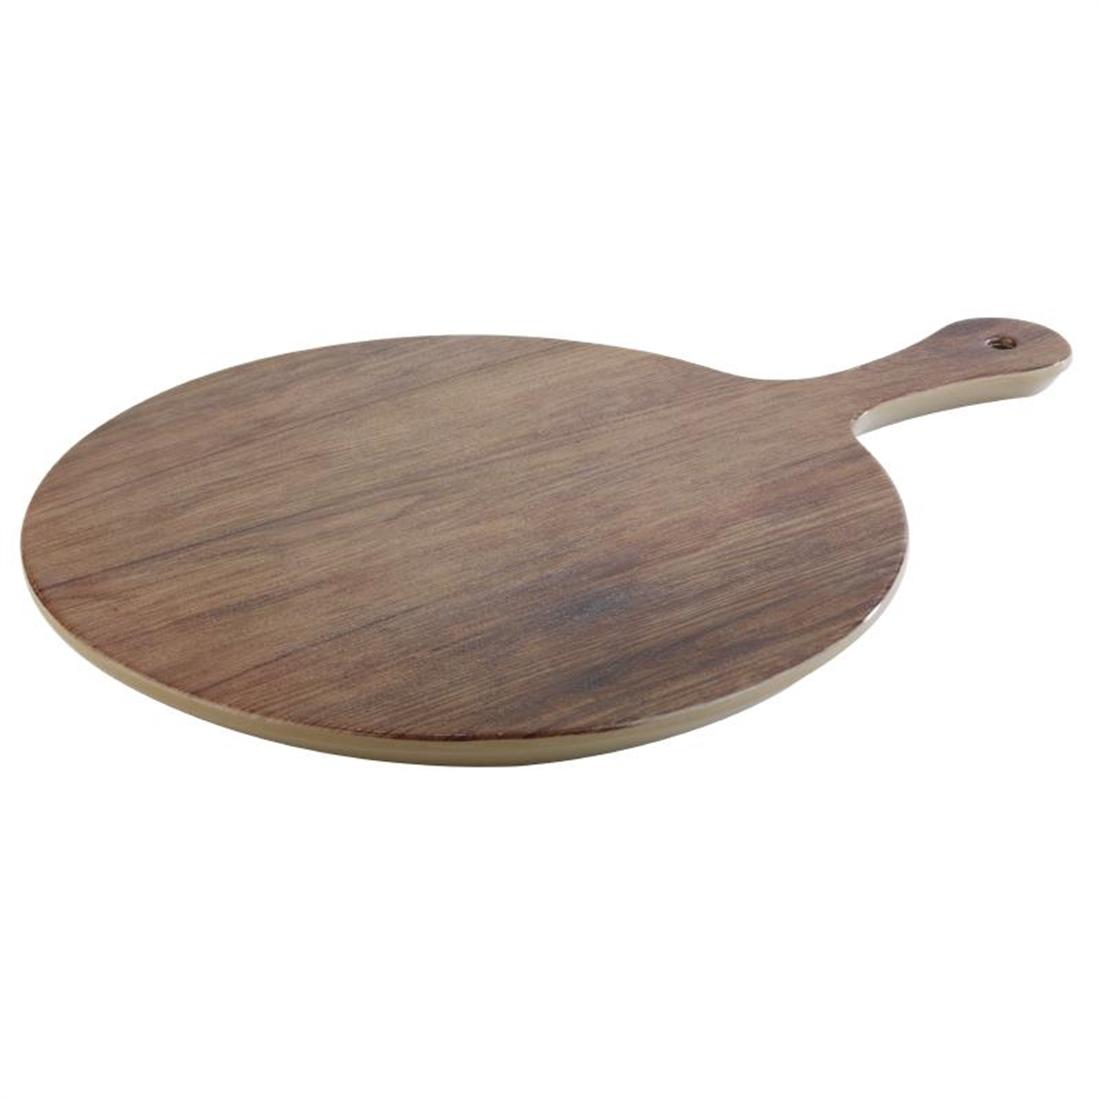 APS Oak Effect Round Handled Paddle Board 300mm - Each - GN560 - 1